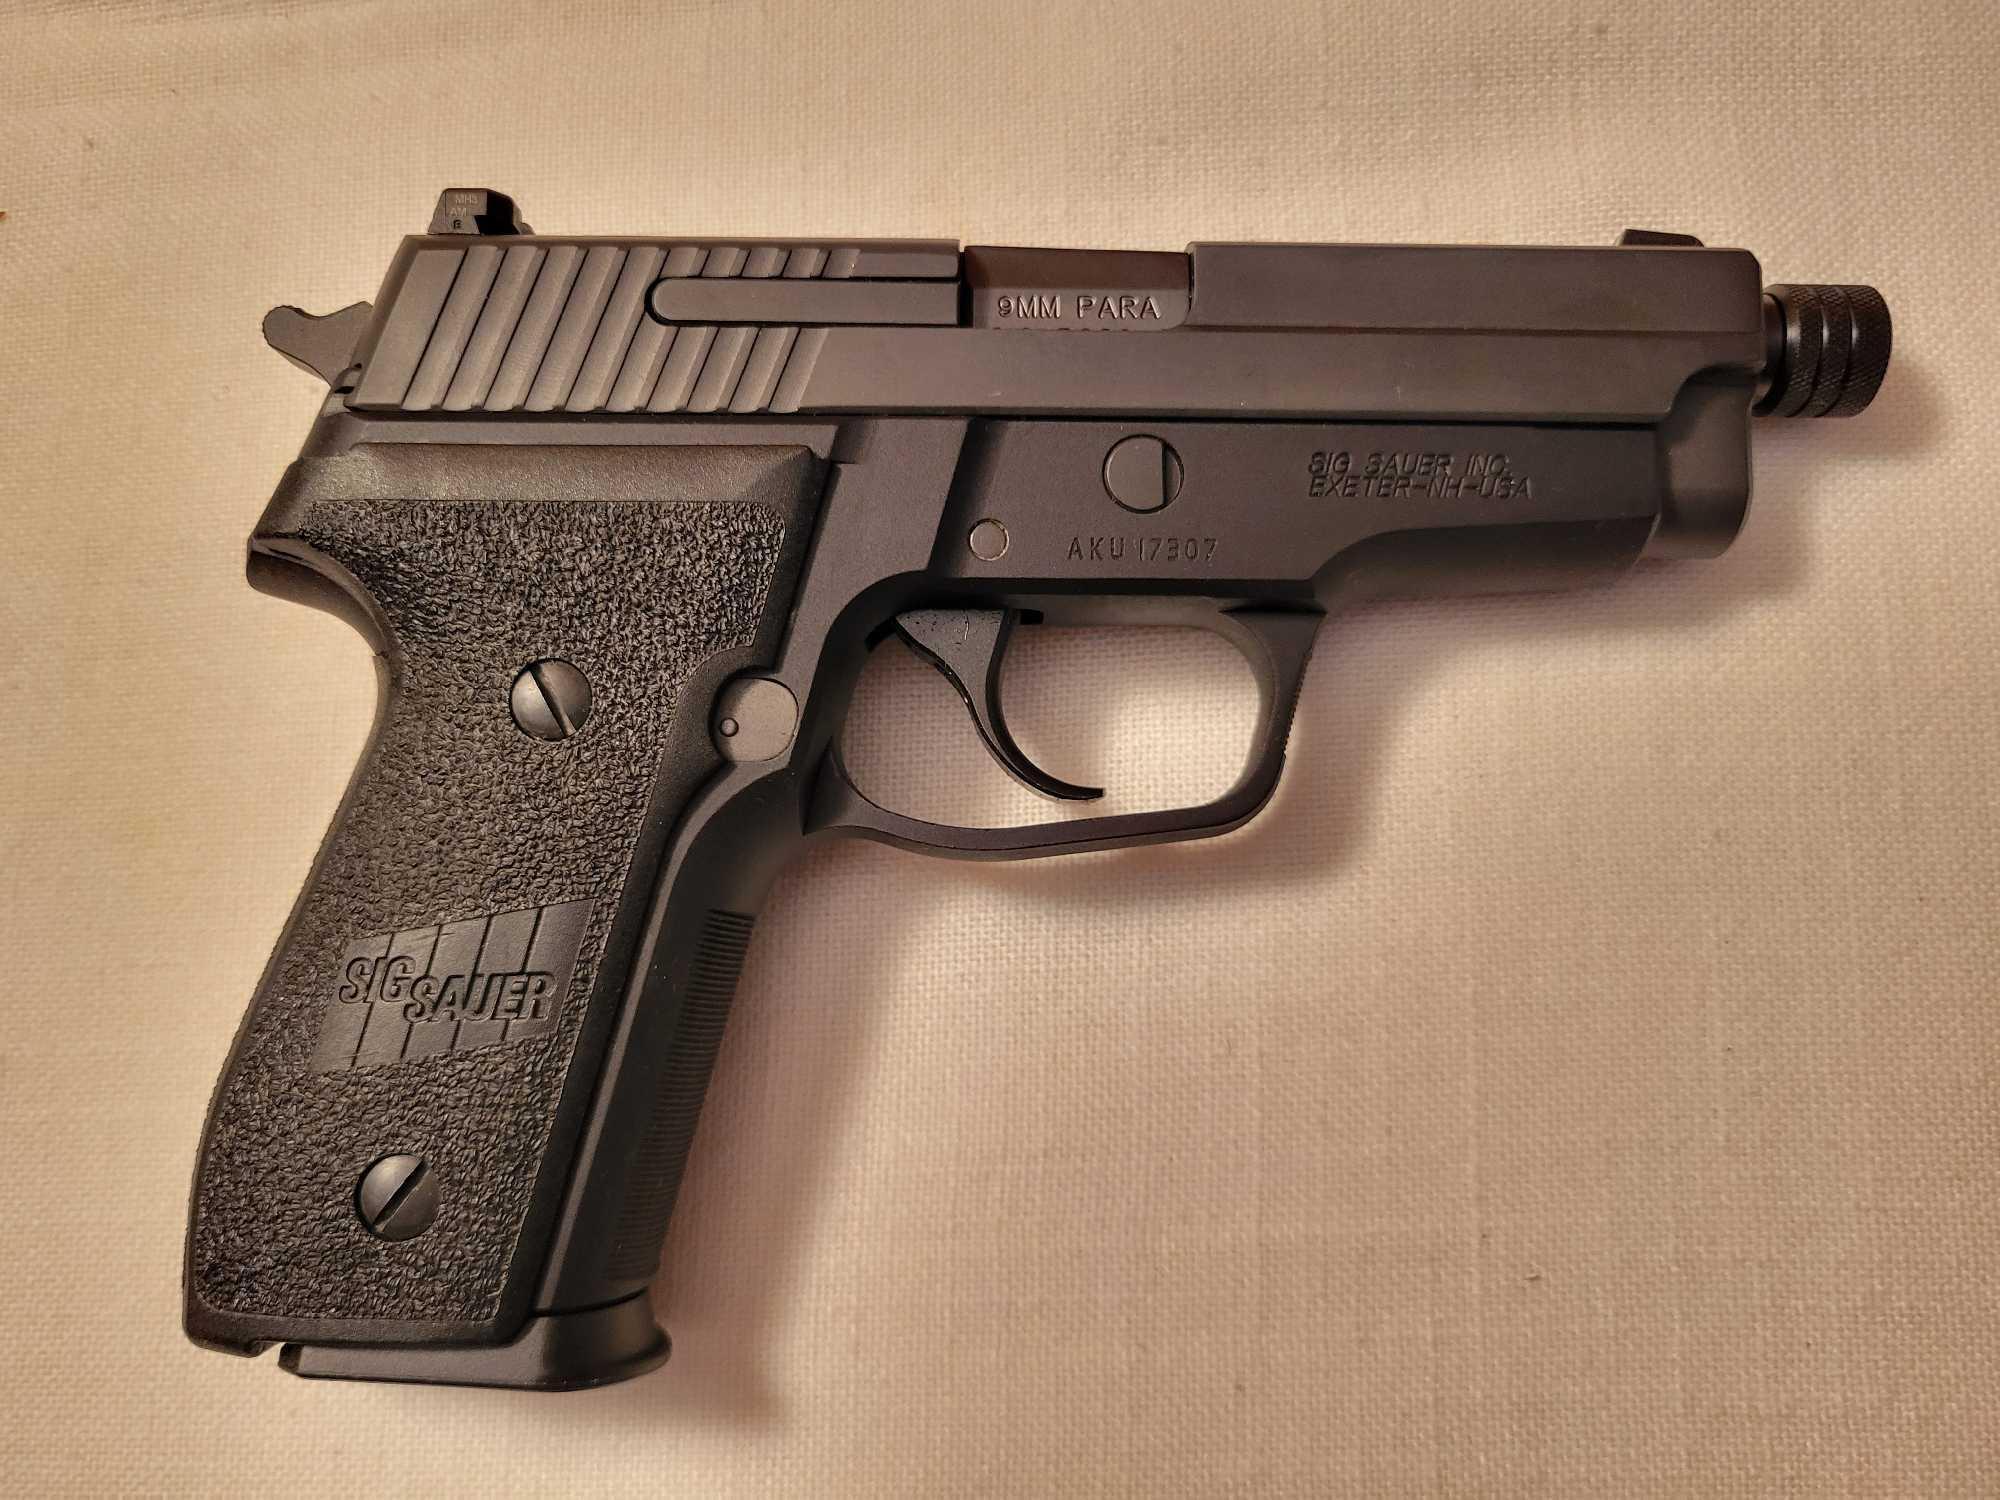 Sig sauer P229-1 9mm para with holster and extra mag